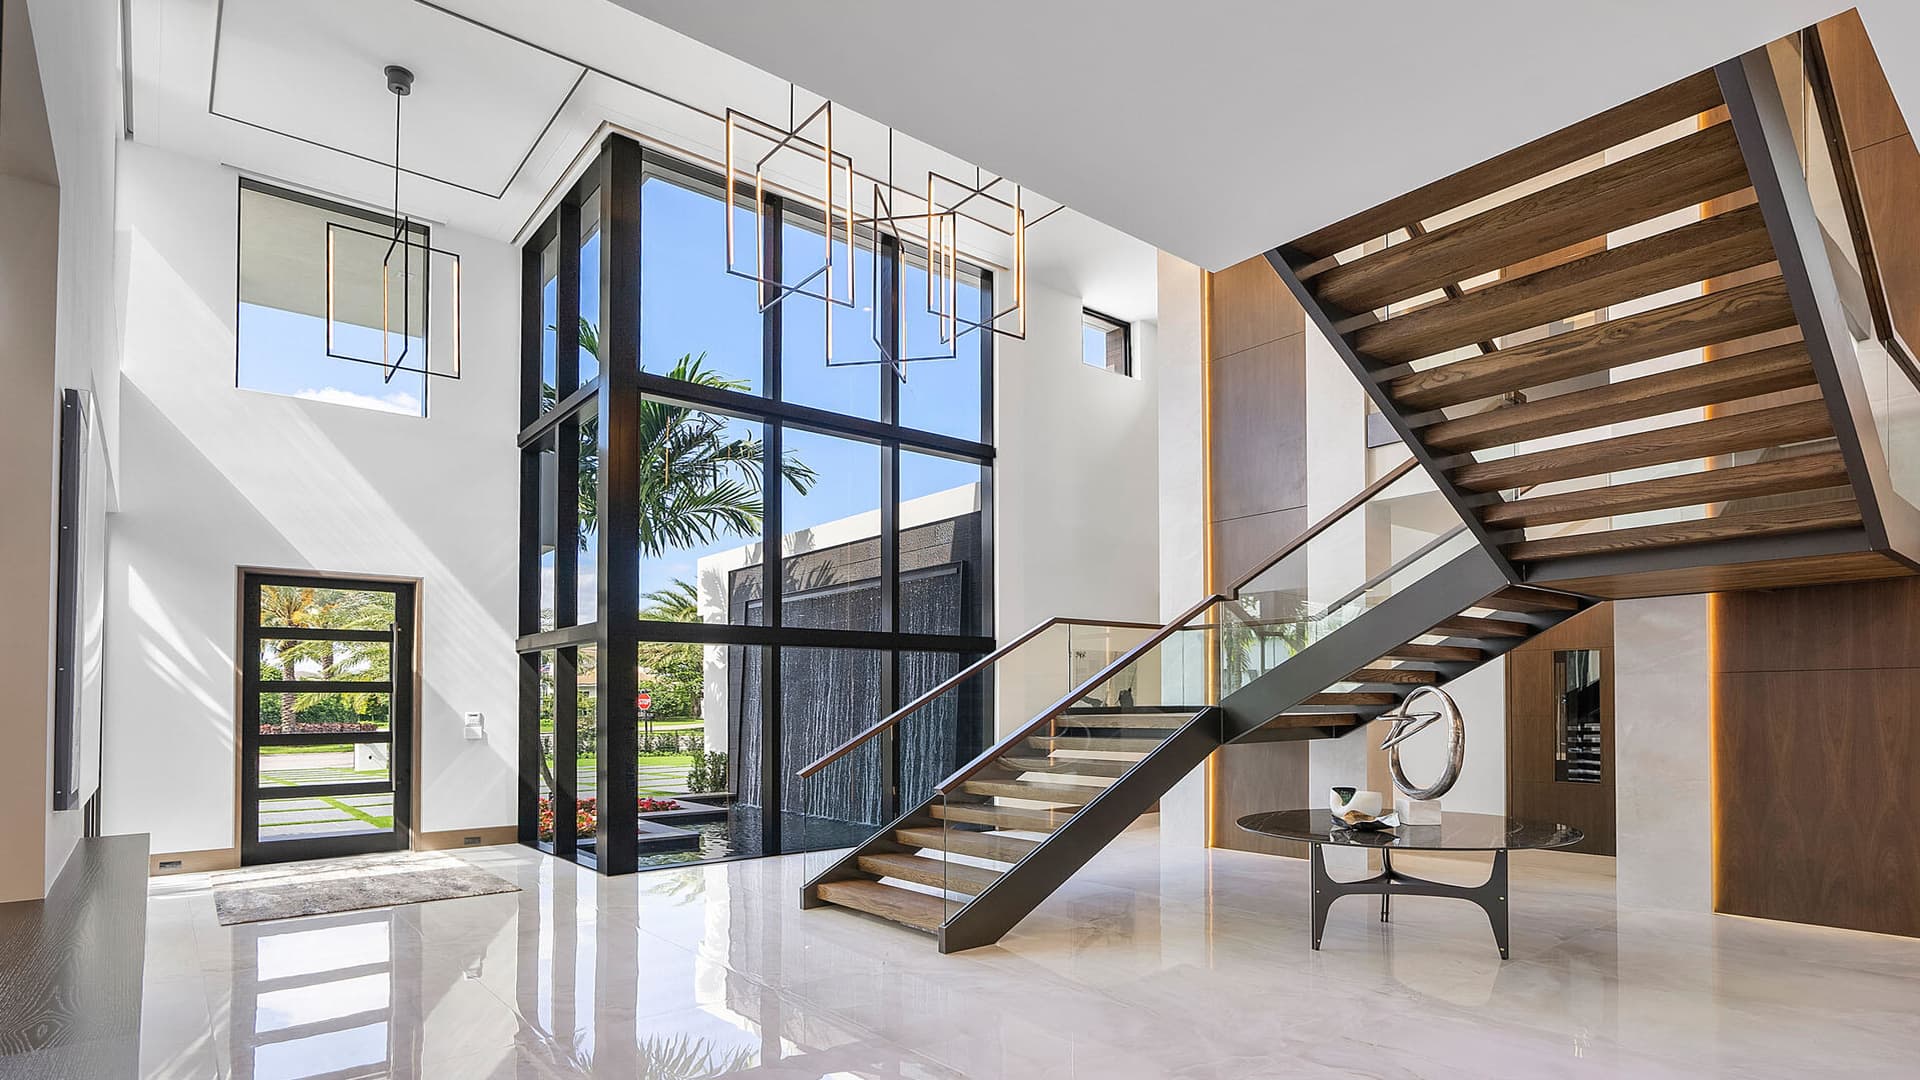 The modern interiors at 298 W Key Palm include a mix of stone & wood finishes with a dramatic floating staircase.